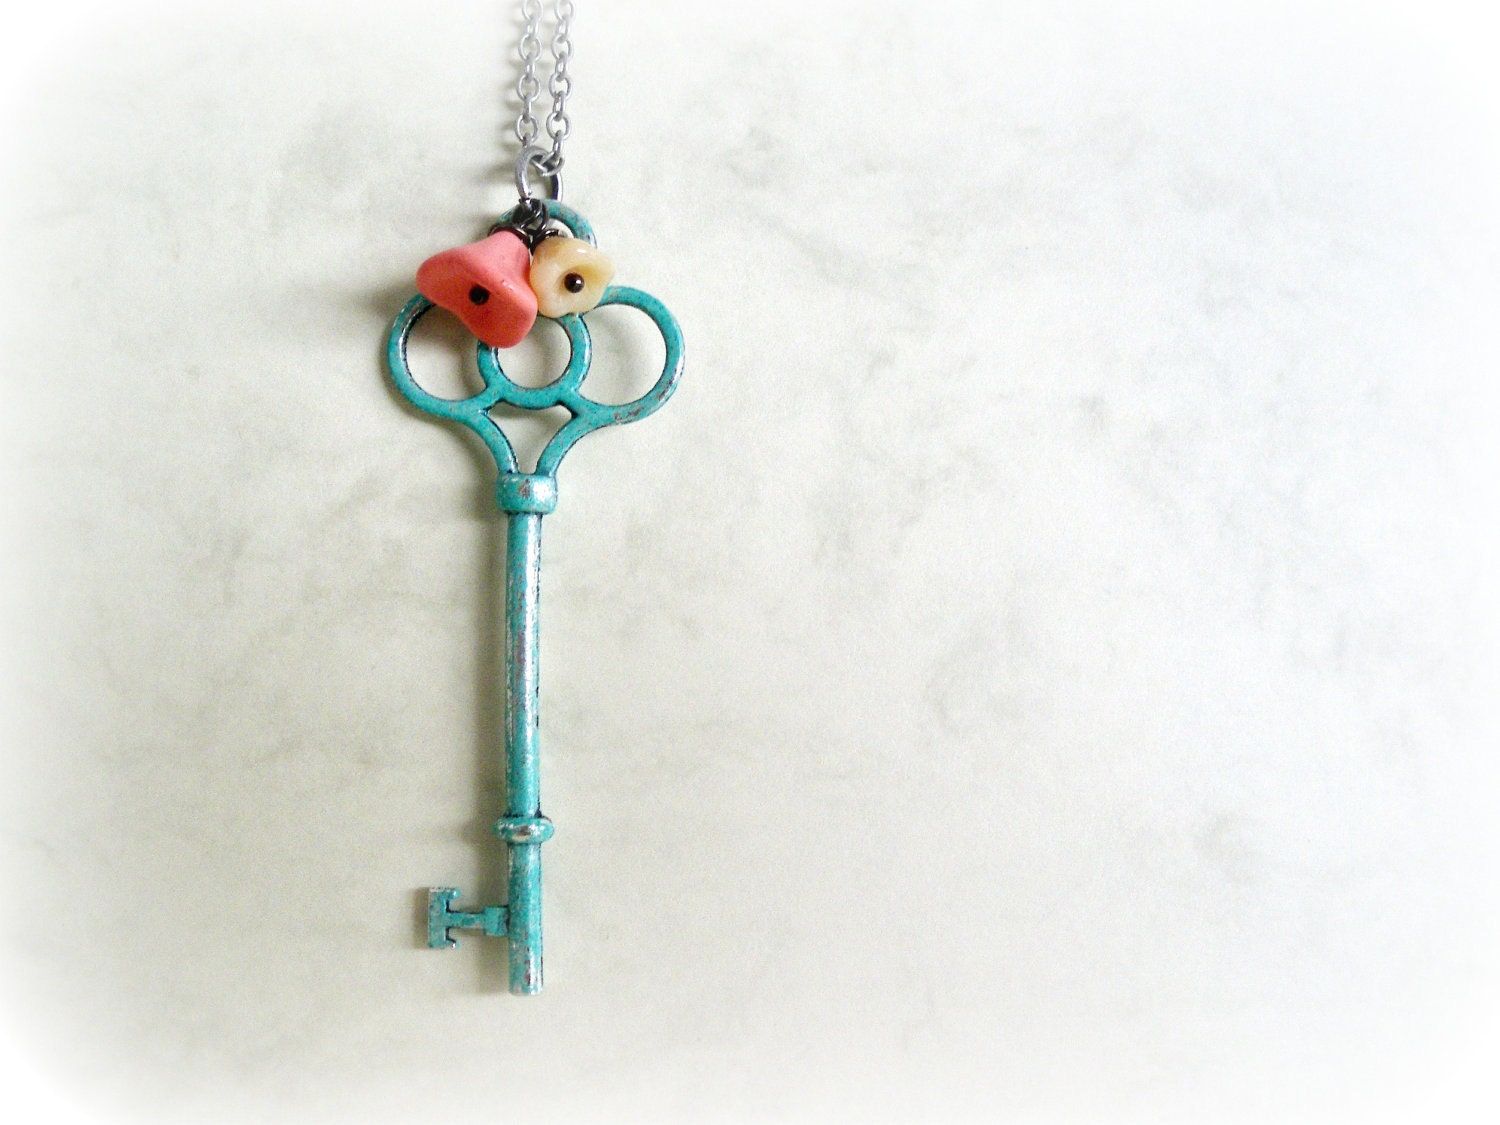 Garden Key-Romantic necklace-Teal blue verdigris patina.Peach pink,white Czech flowers.Antiqued silver chain.Gift for her.Valentines - GBILOBA